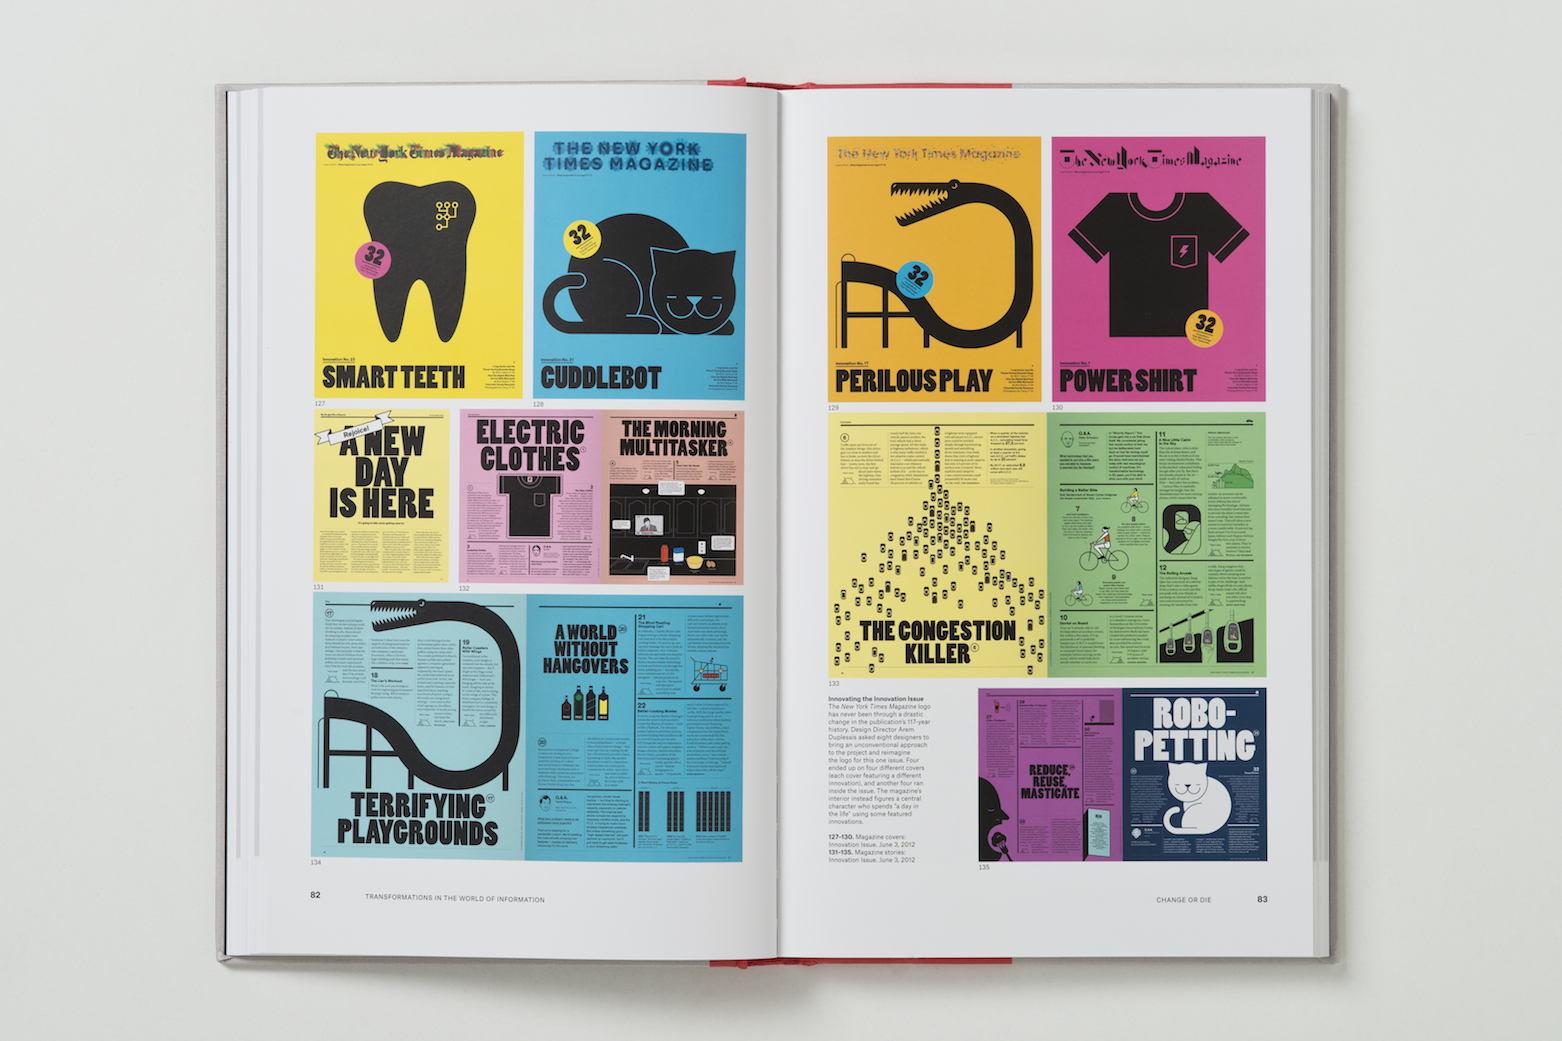 Designing News. Changing the World of Editorial Design and Information Graphics di Francesco Franchi